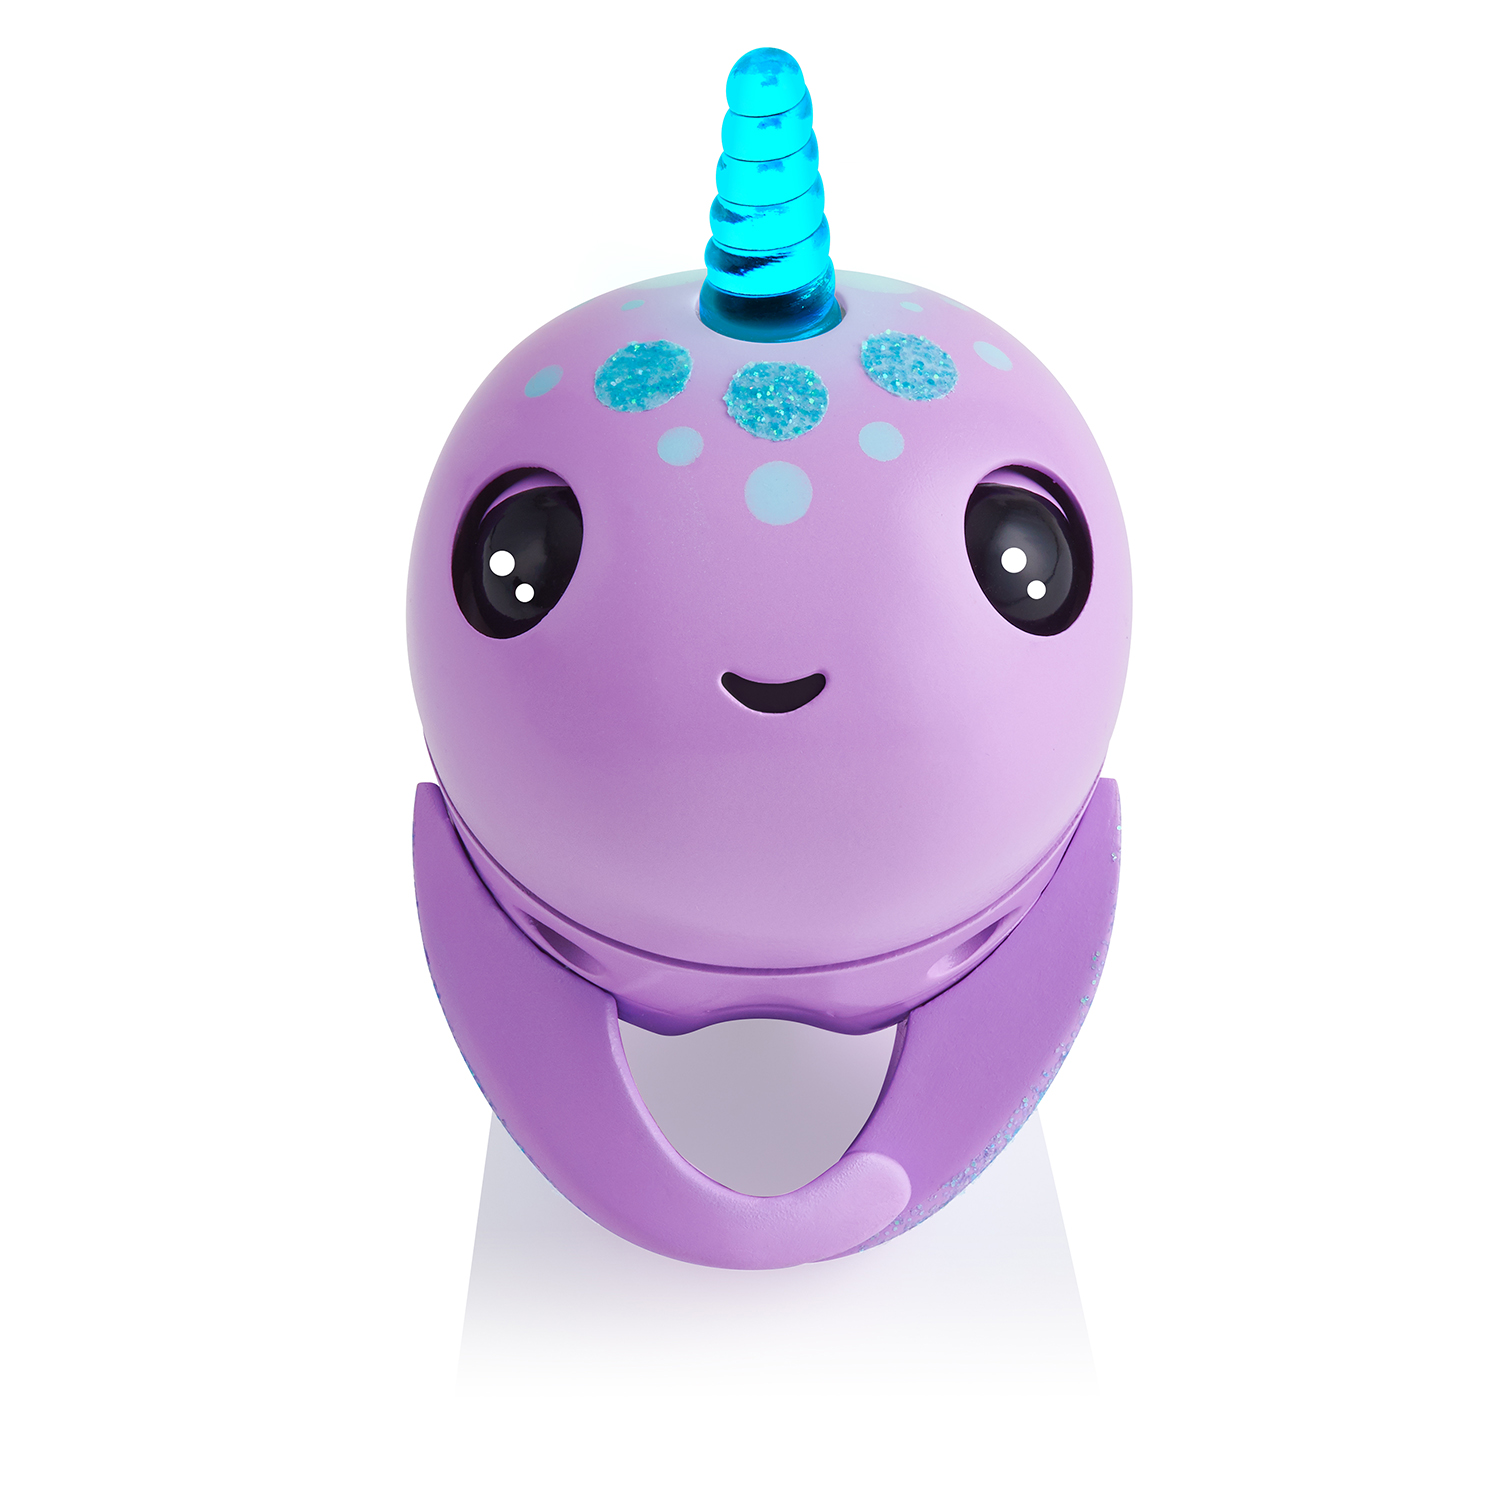 Fingerlings Light Up Narwhal - Nelly (Purple) - Friendly Interactive Toy by WowWee - image 4 of 10